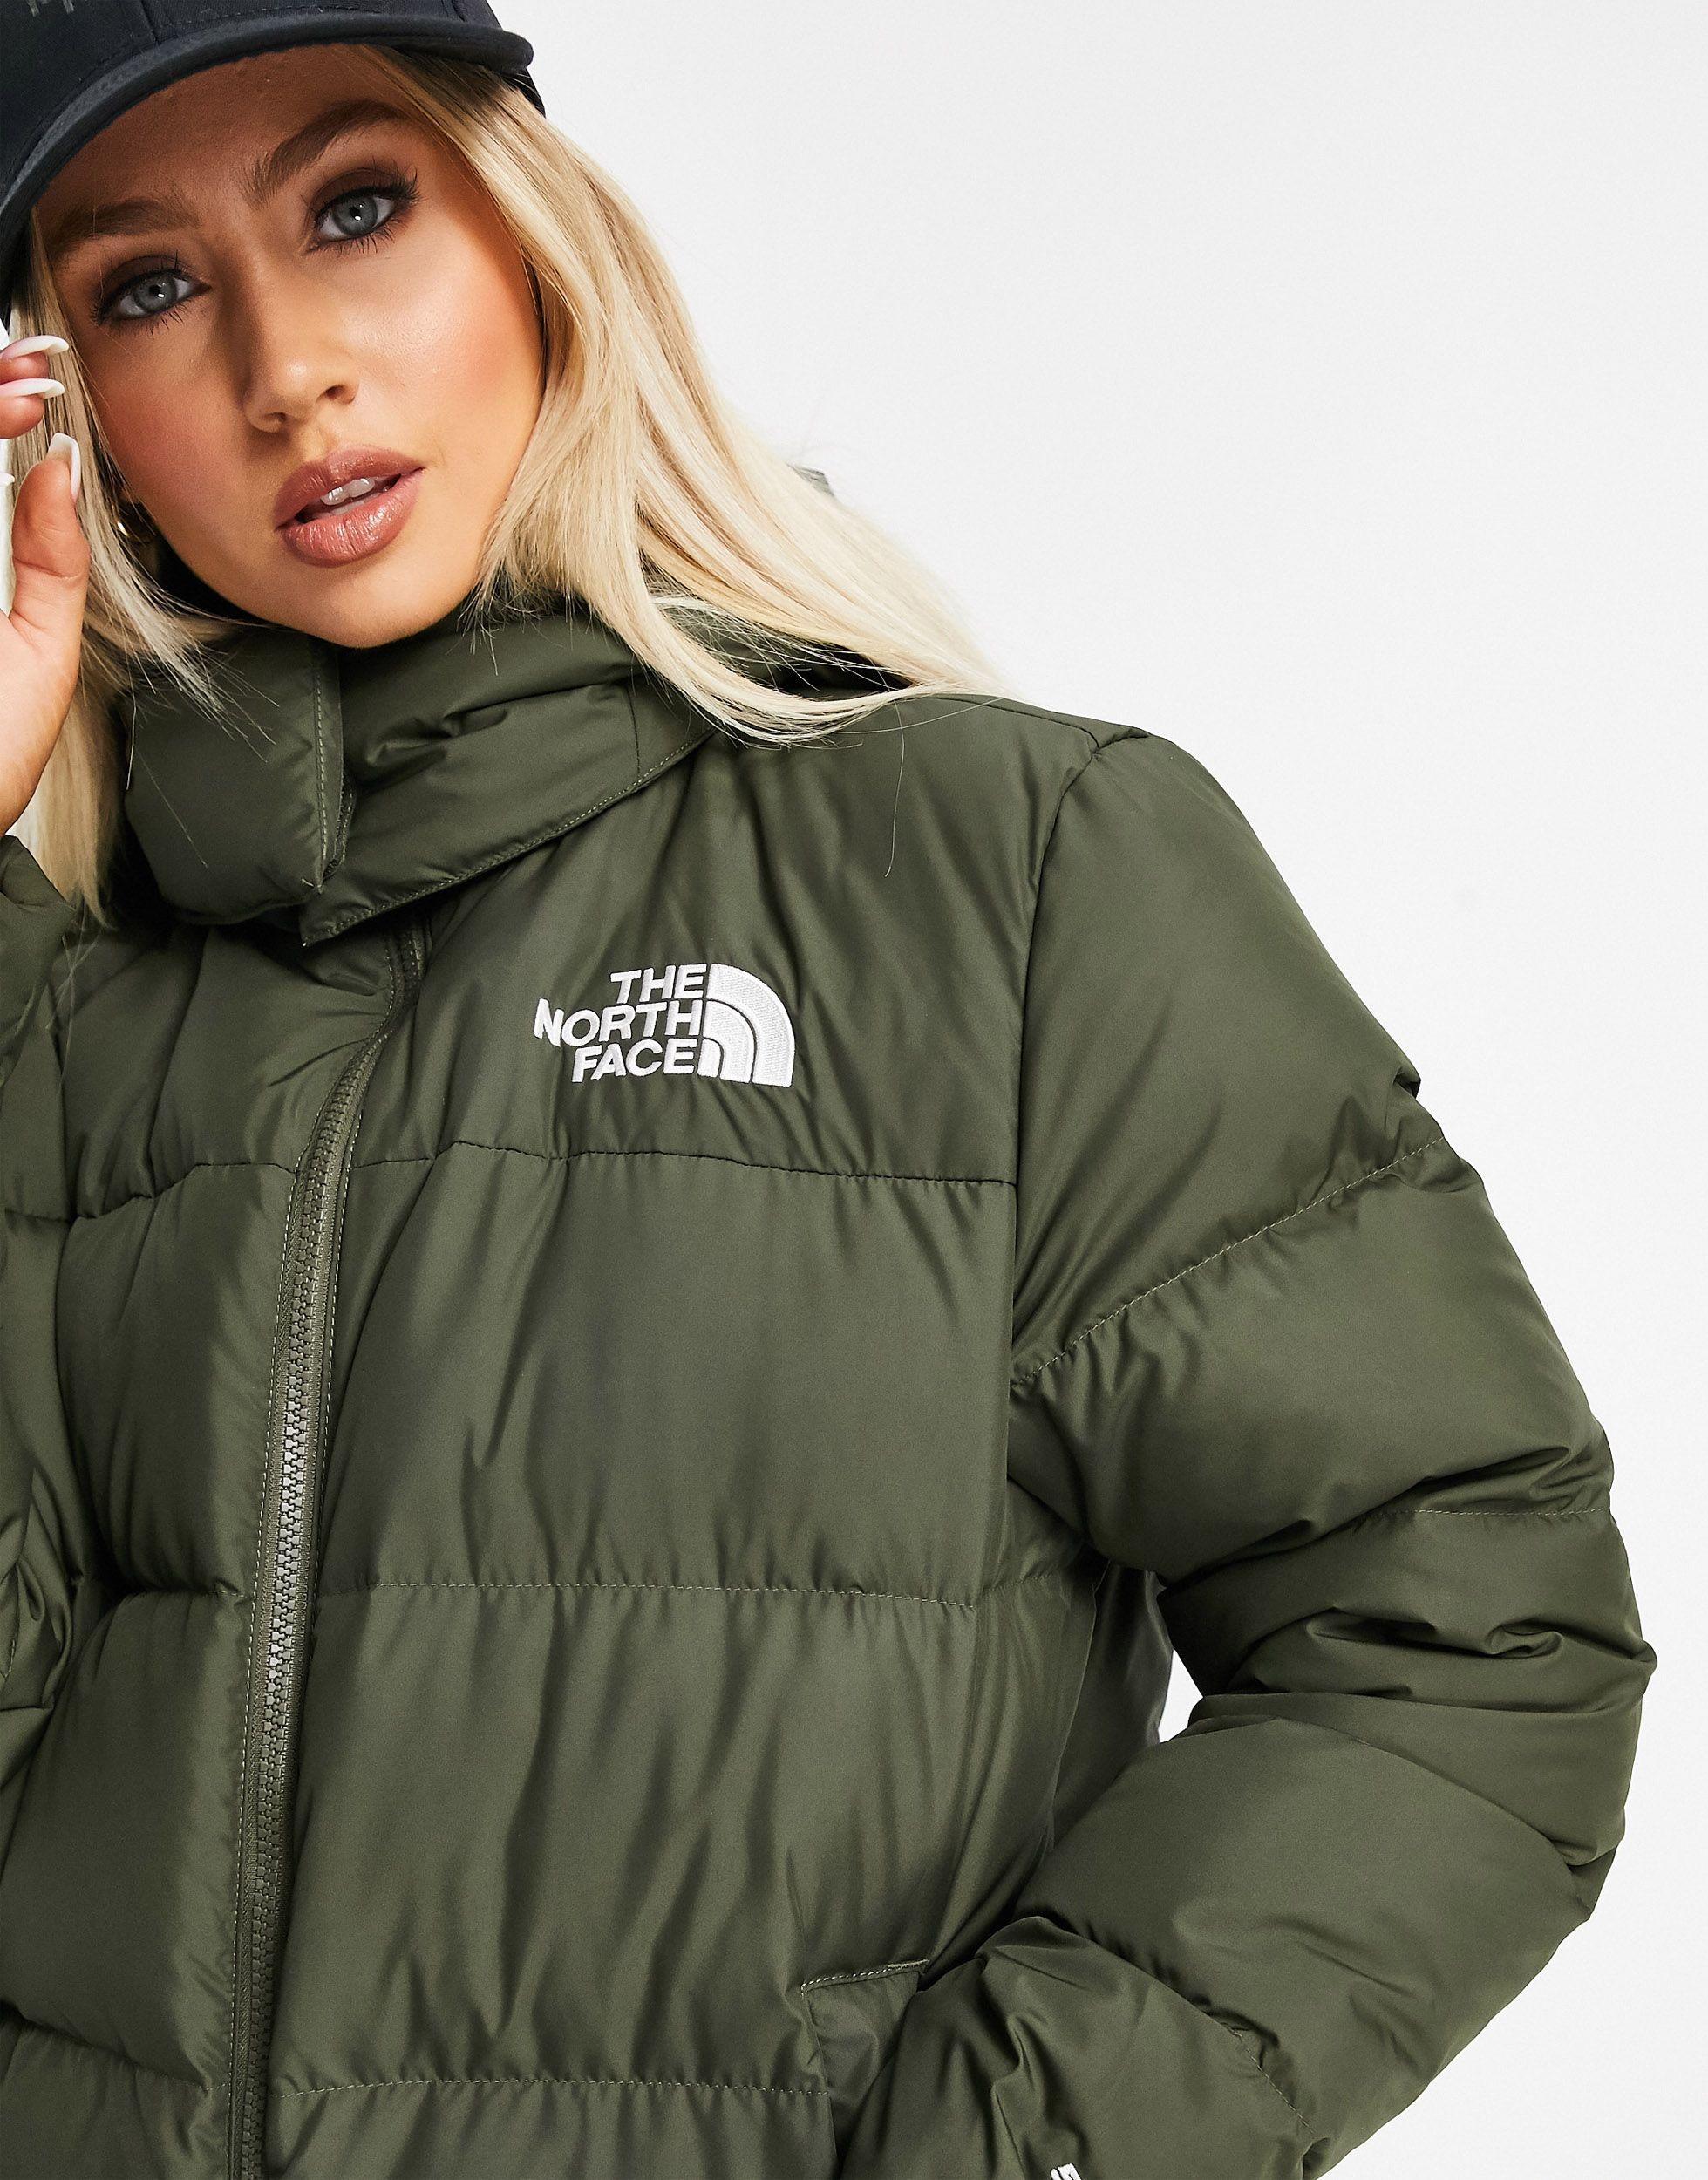 The North Face Triple C Parka Jacket in Green | Lyst